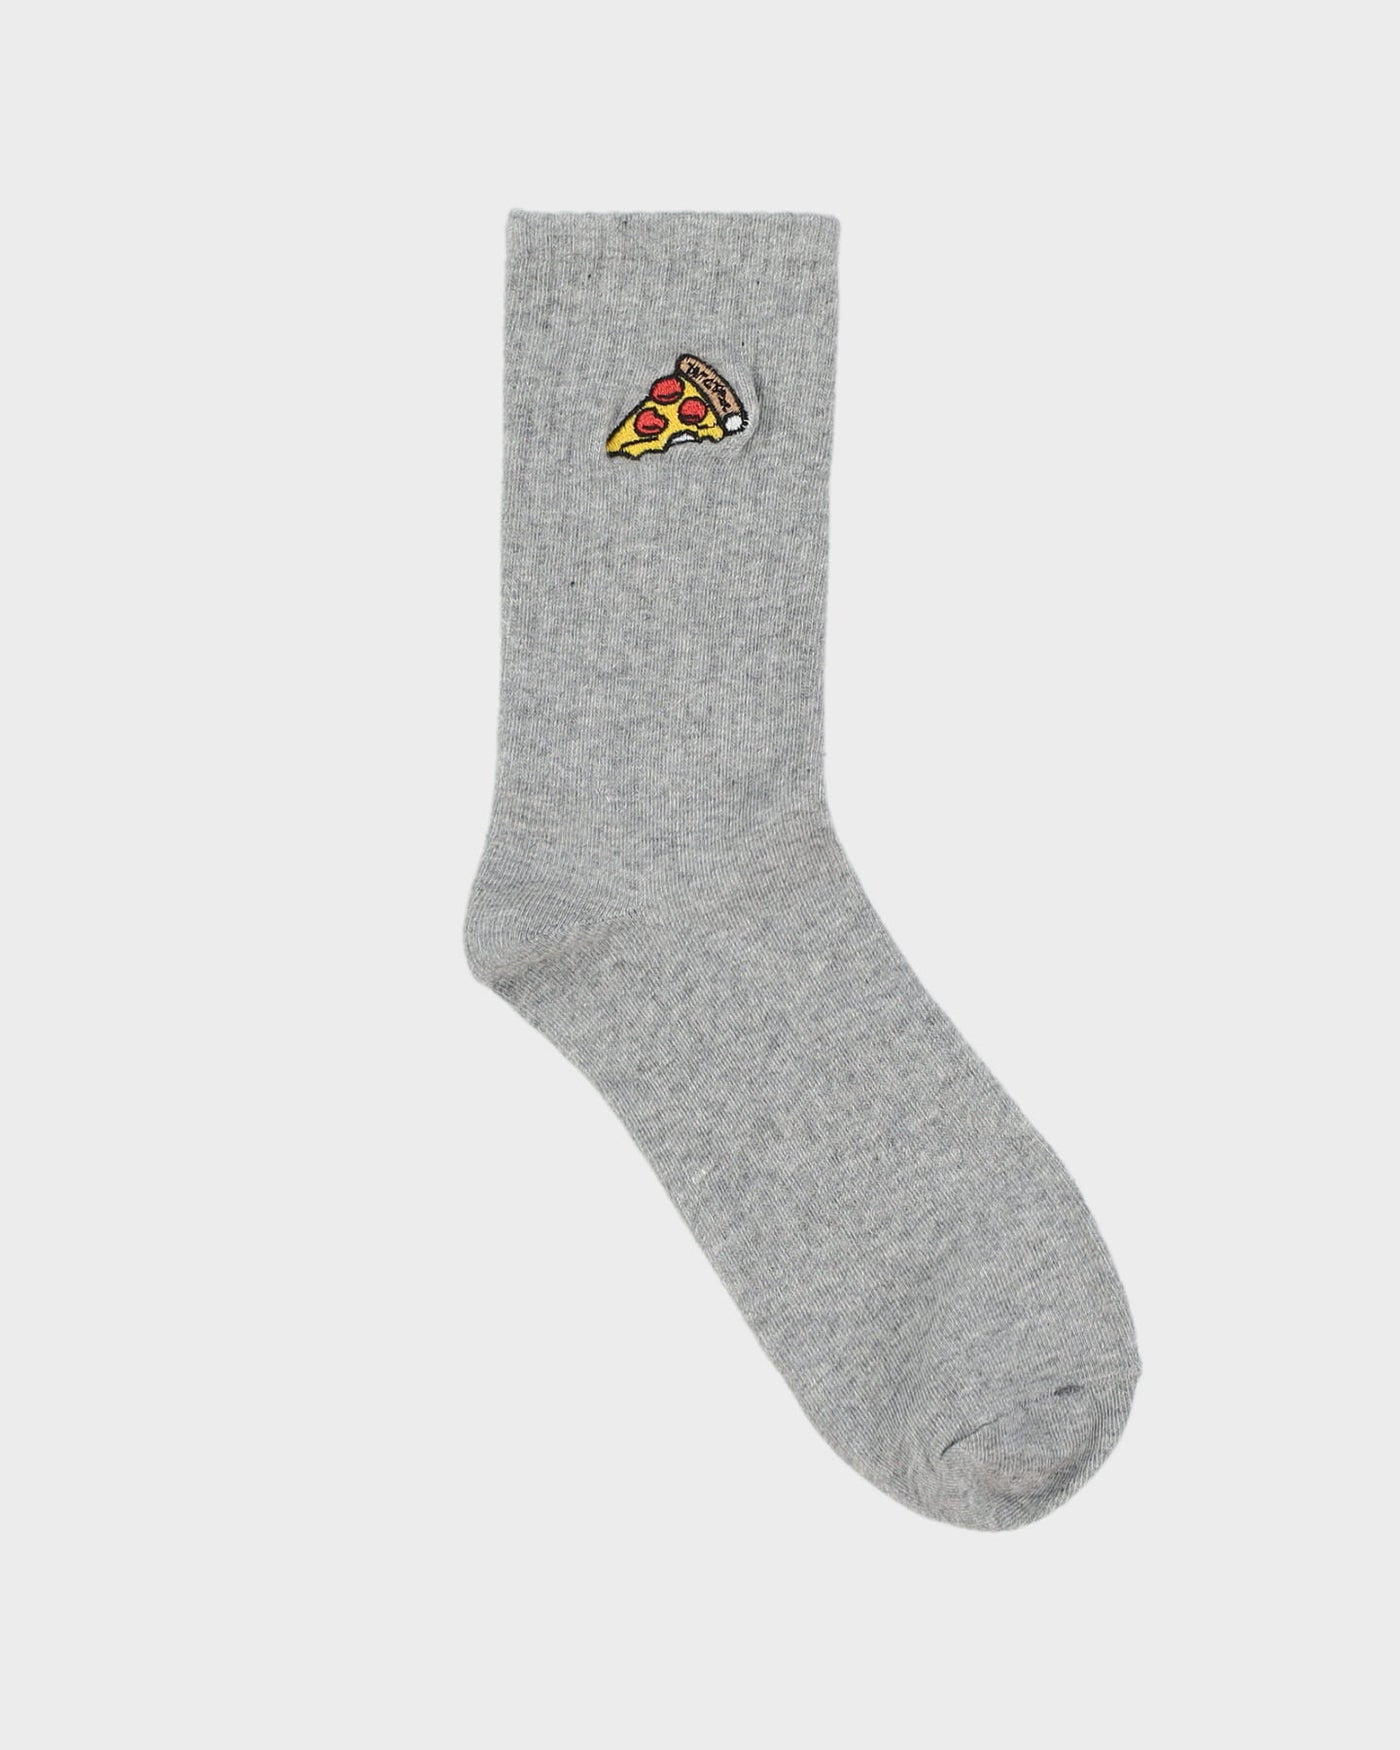 Grey Pizza Embroidered Socks